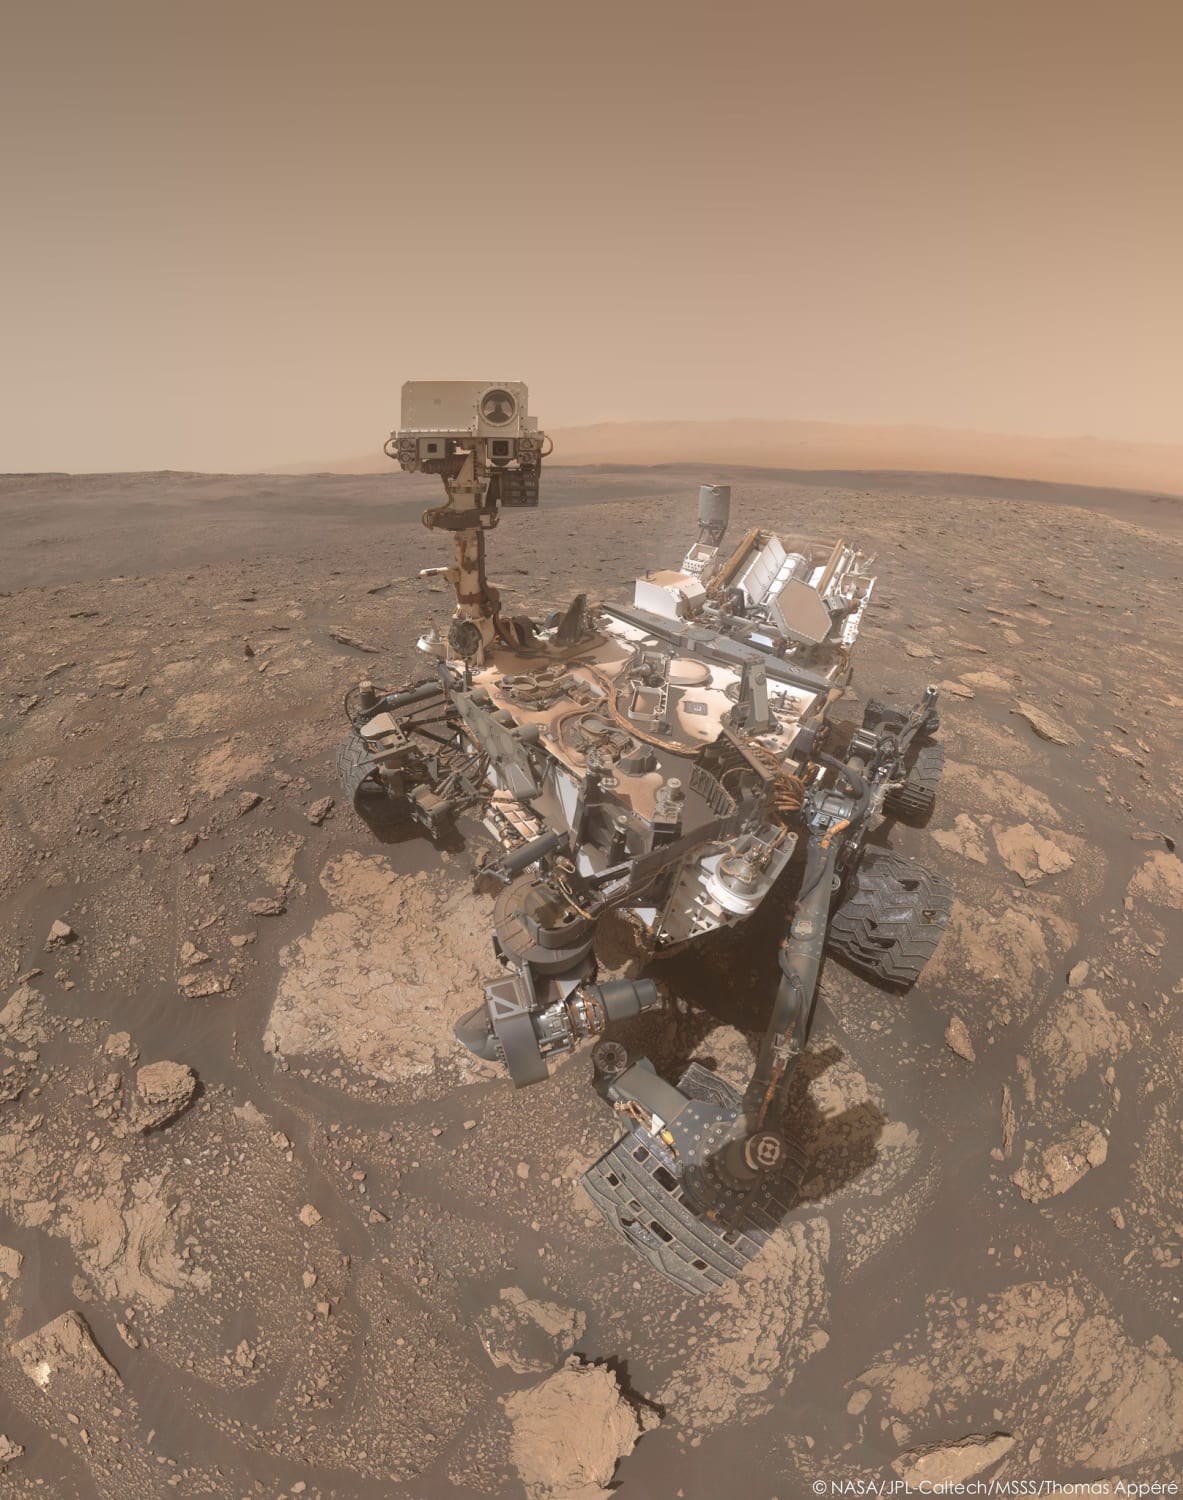 This is the most recent selfie from NASA's Curiosity Mars rover. It was taken at a location nicknamed "Mary Anning" after a 19th century English paleontologist, in 2020. (Credit: NASA/JPL-Caltech/MSSS)